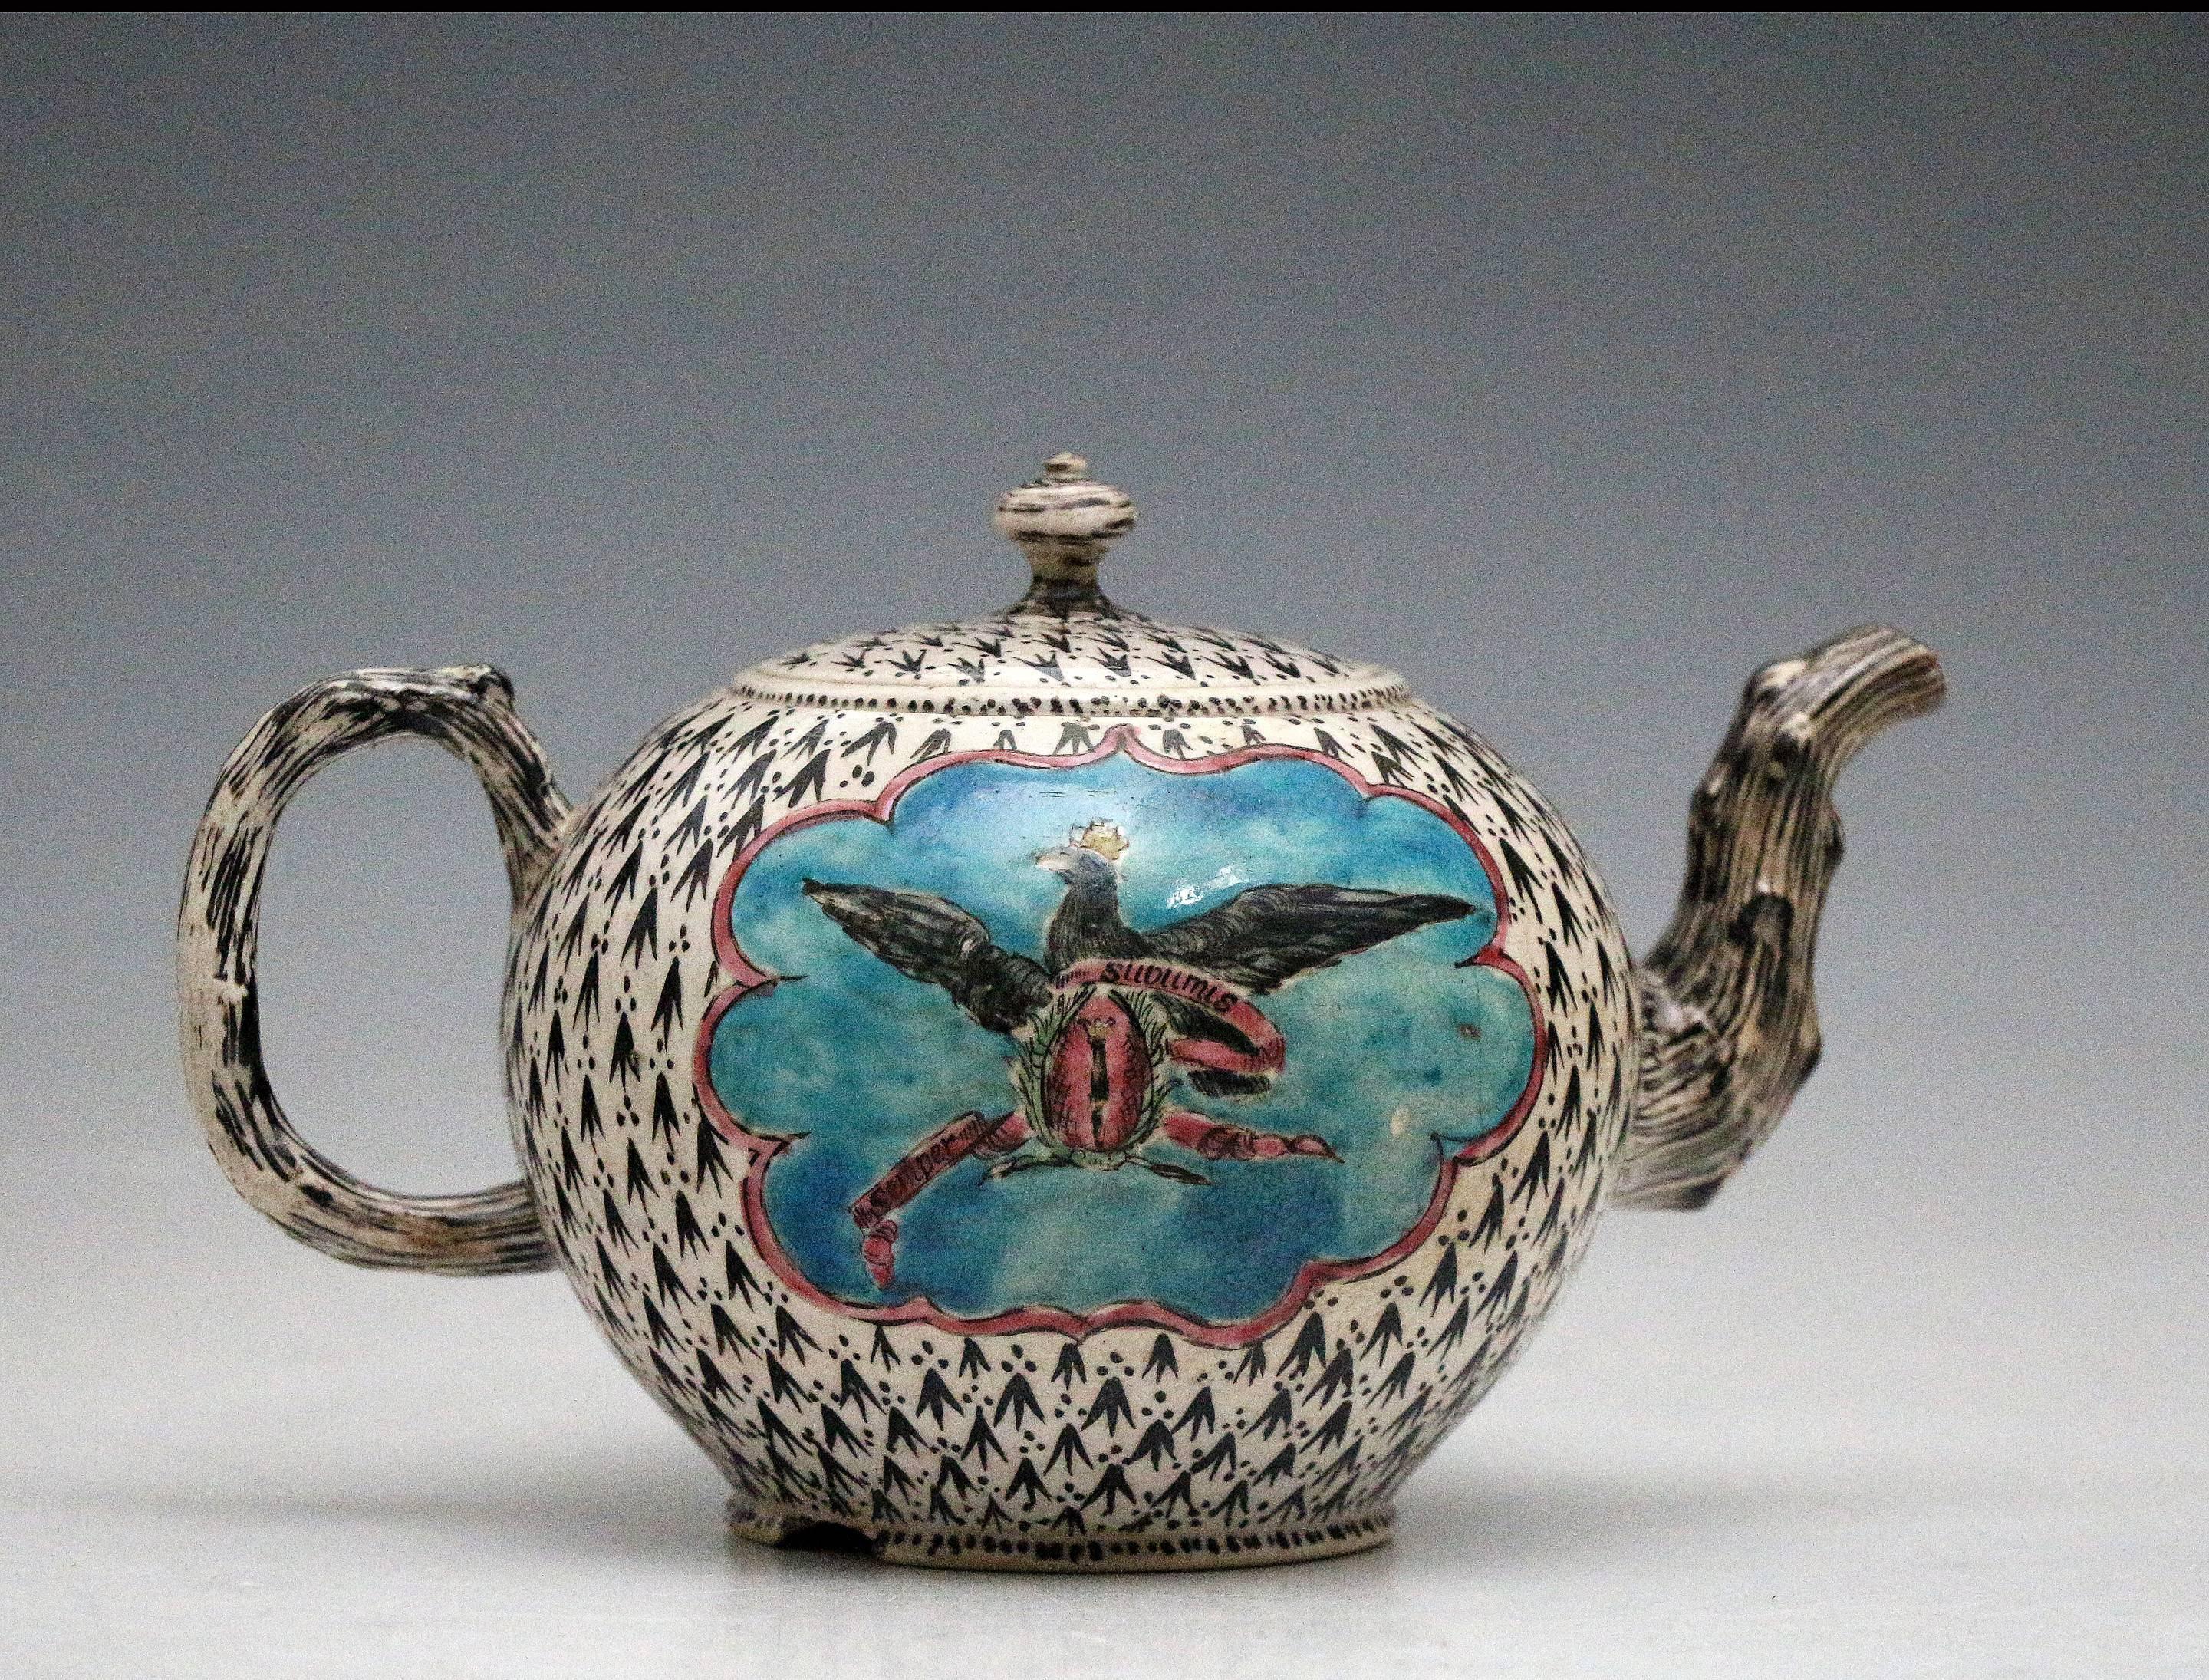 Fine King of Prussia saltglaze teapot, Staffordshire, mid-18th century. The teapot is a globular form, applied with a crabstock handle and spout, fully decorated with an 'ermine' ground of darts and dots in black, reserved with a colorful